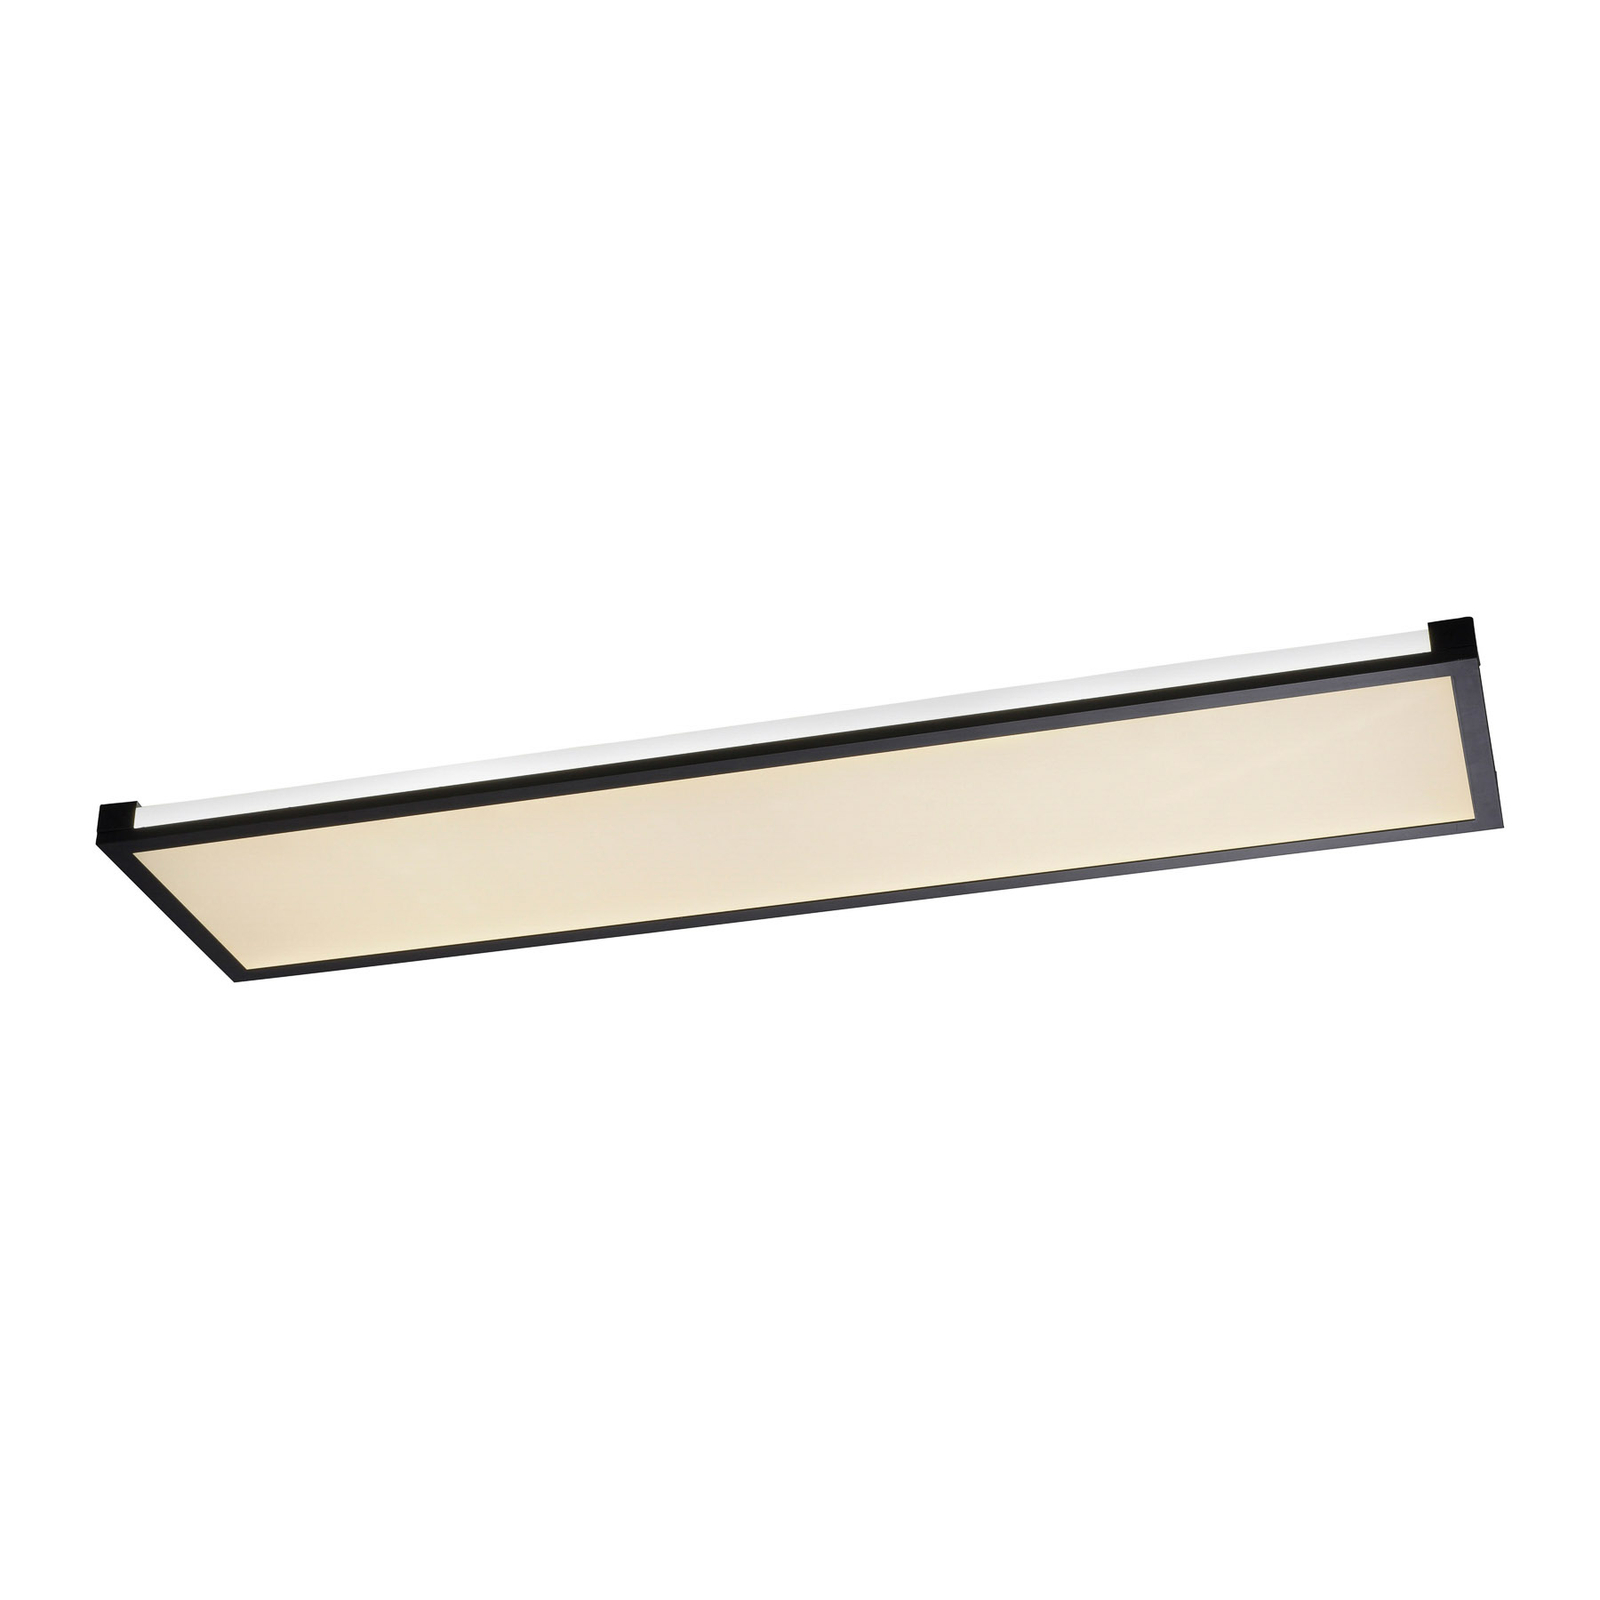 Mario LED ceiling lamp 100 x 25 cm, dimmable, RGBW